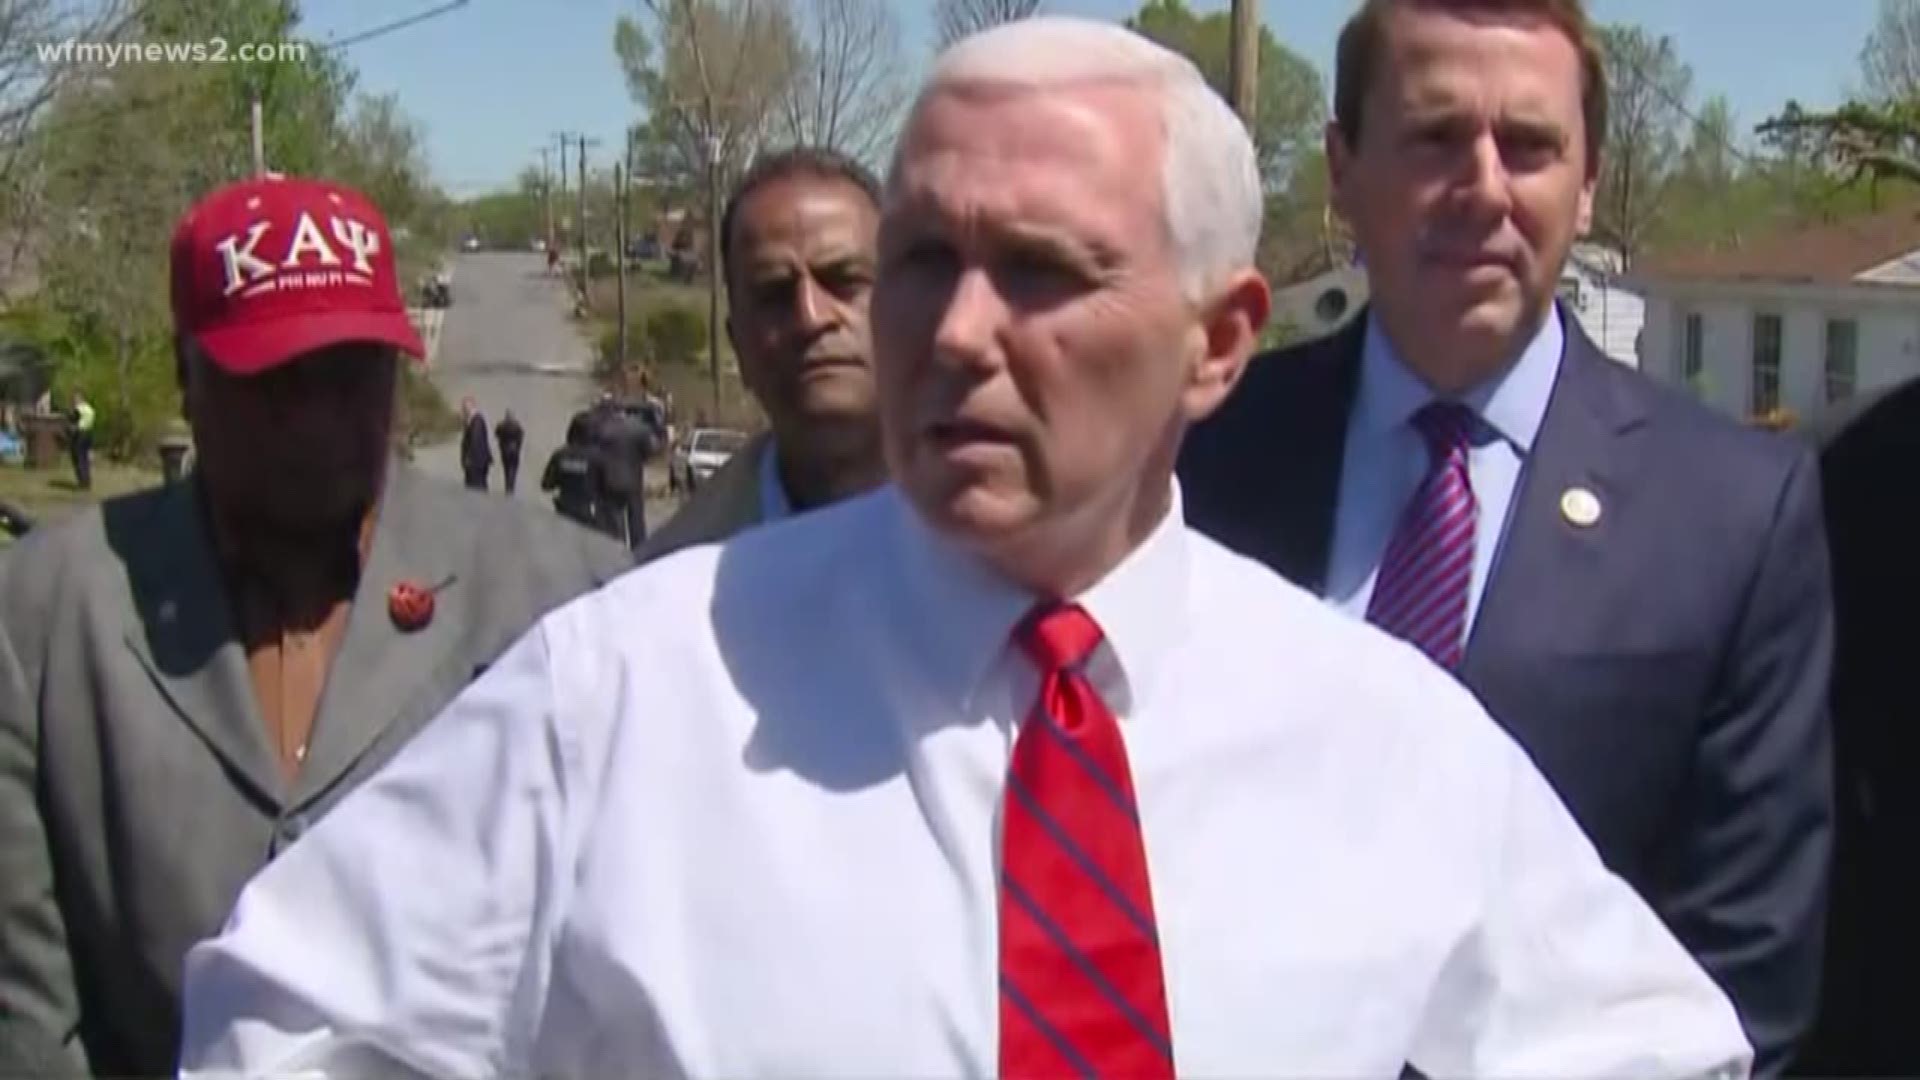 Vice-President Mike Pence was in Greensboro Friday for a private fundraiser on behalf of Rep. Mark Walker. Before heading to the fundraiser Pence walked through a part of northeast Greensboro that was destroyed from Sunday's tornado.